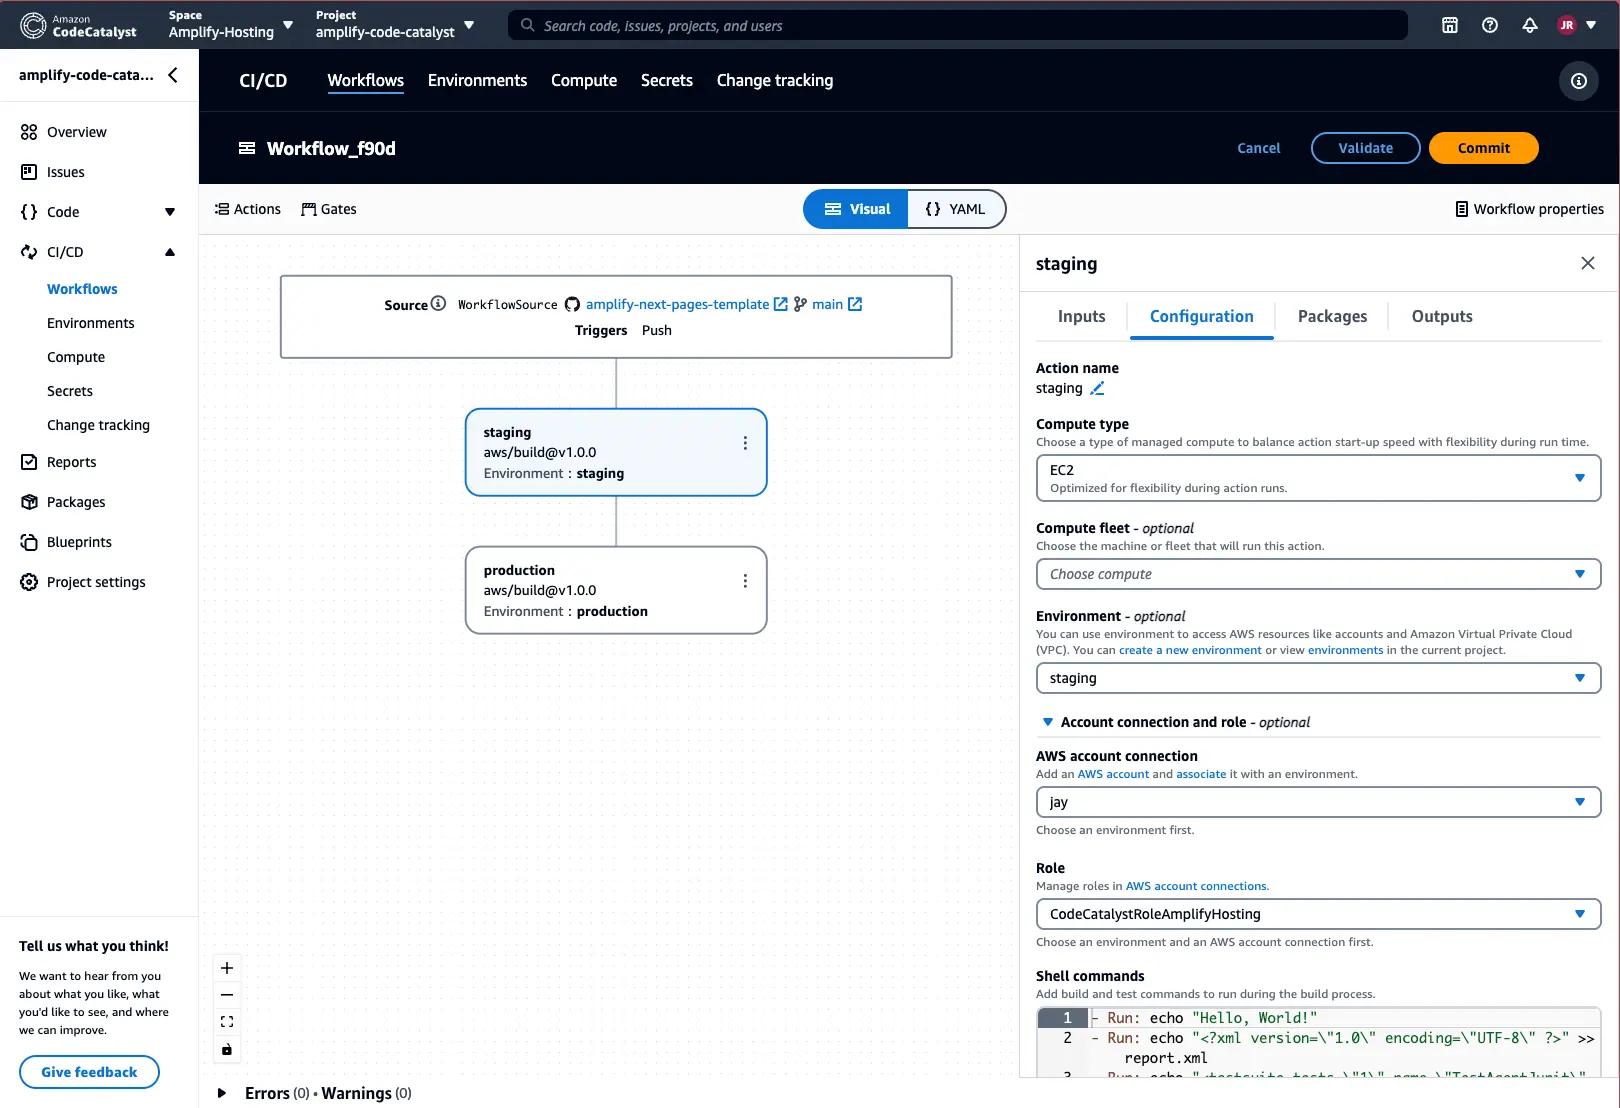 Screenshot of CodeCatalyst console showing the Workflows section, focusing on the Configuration section